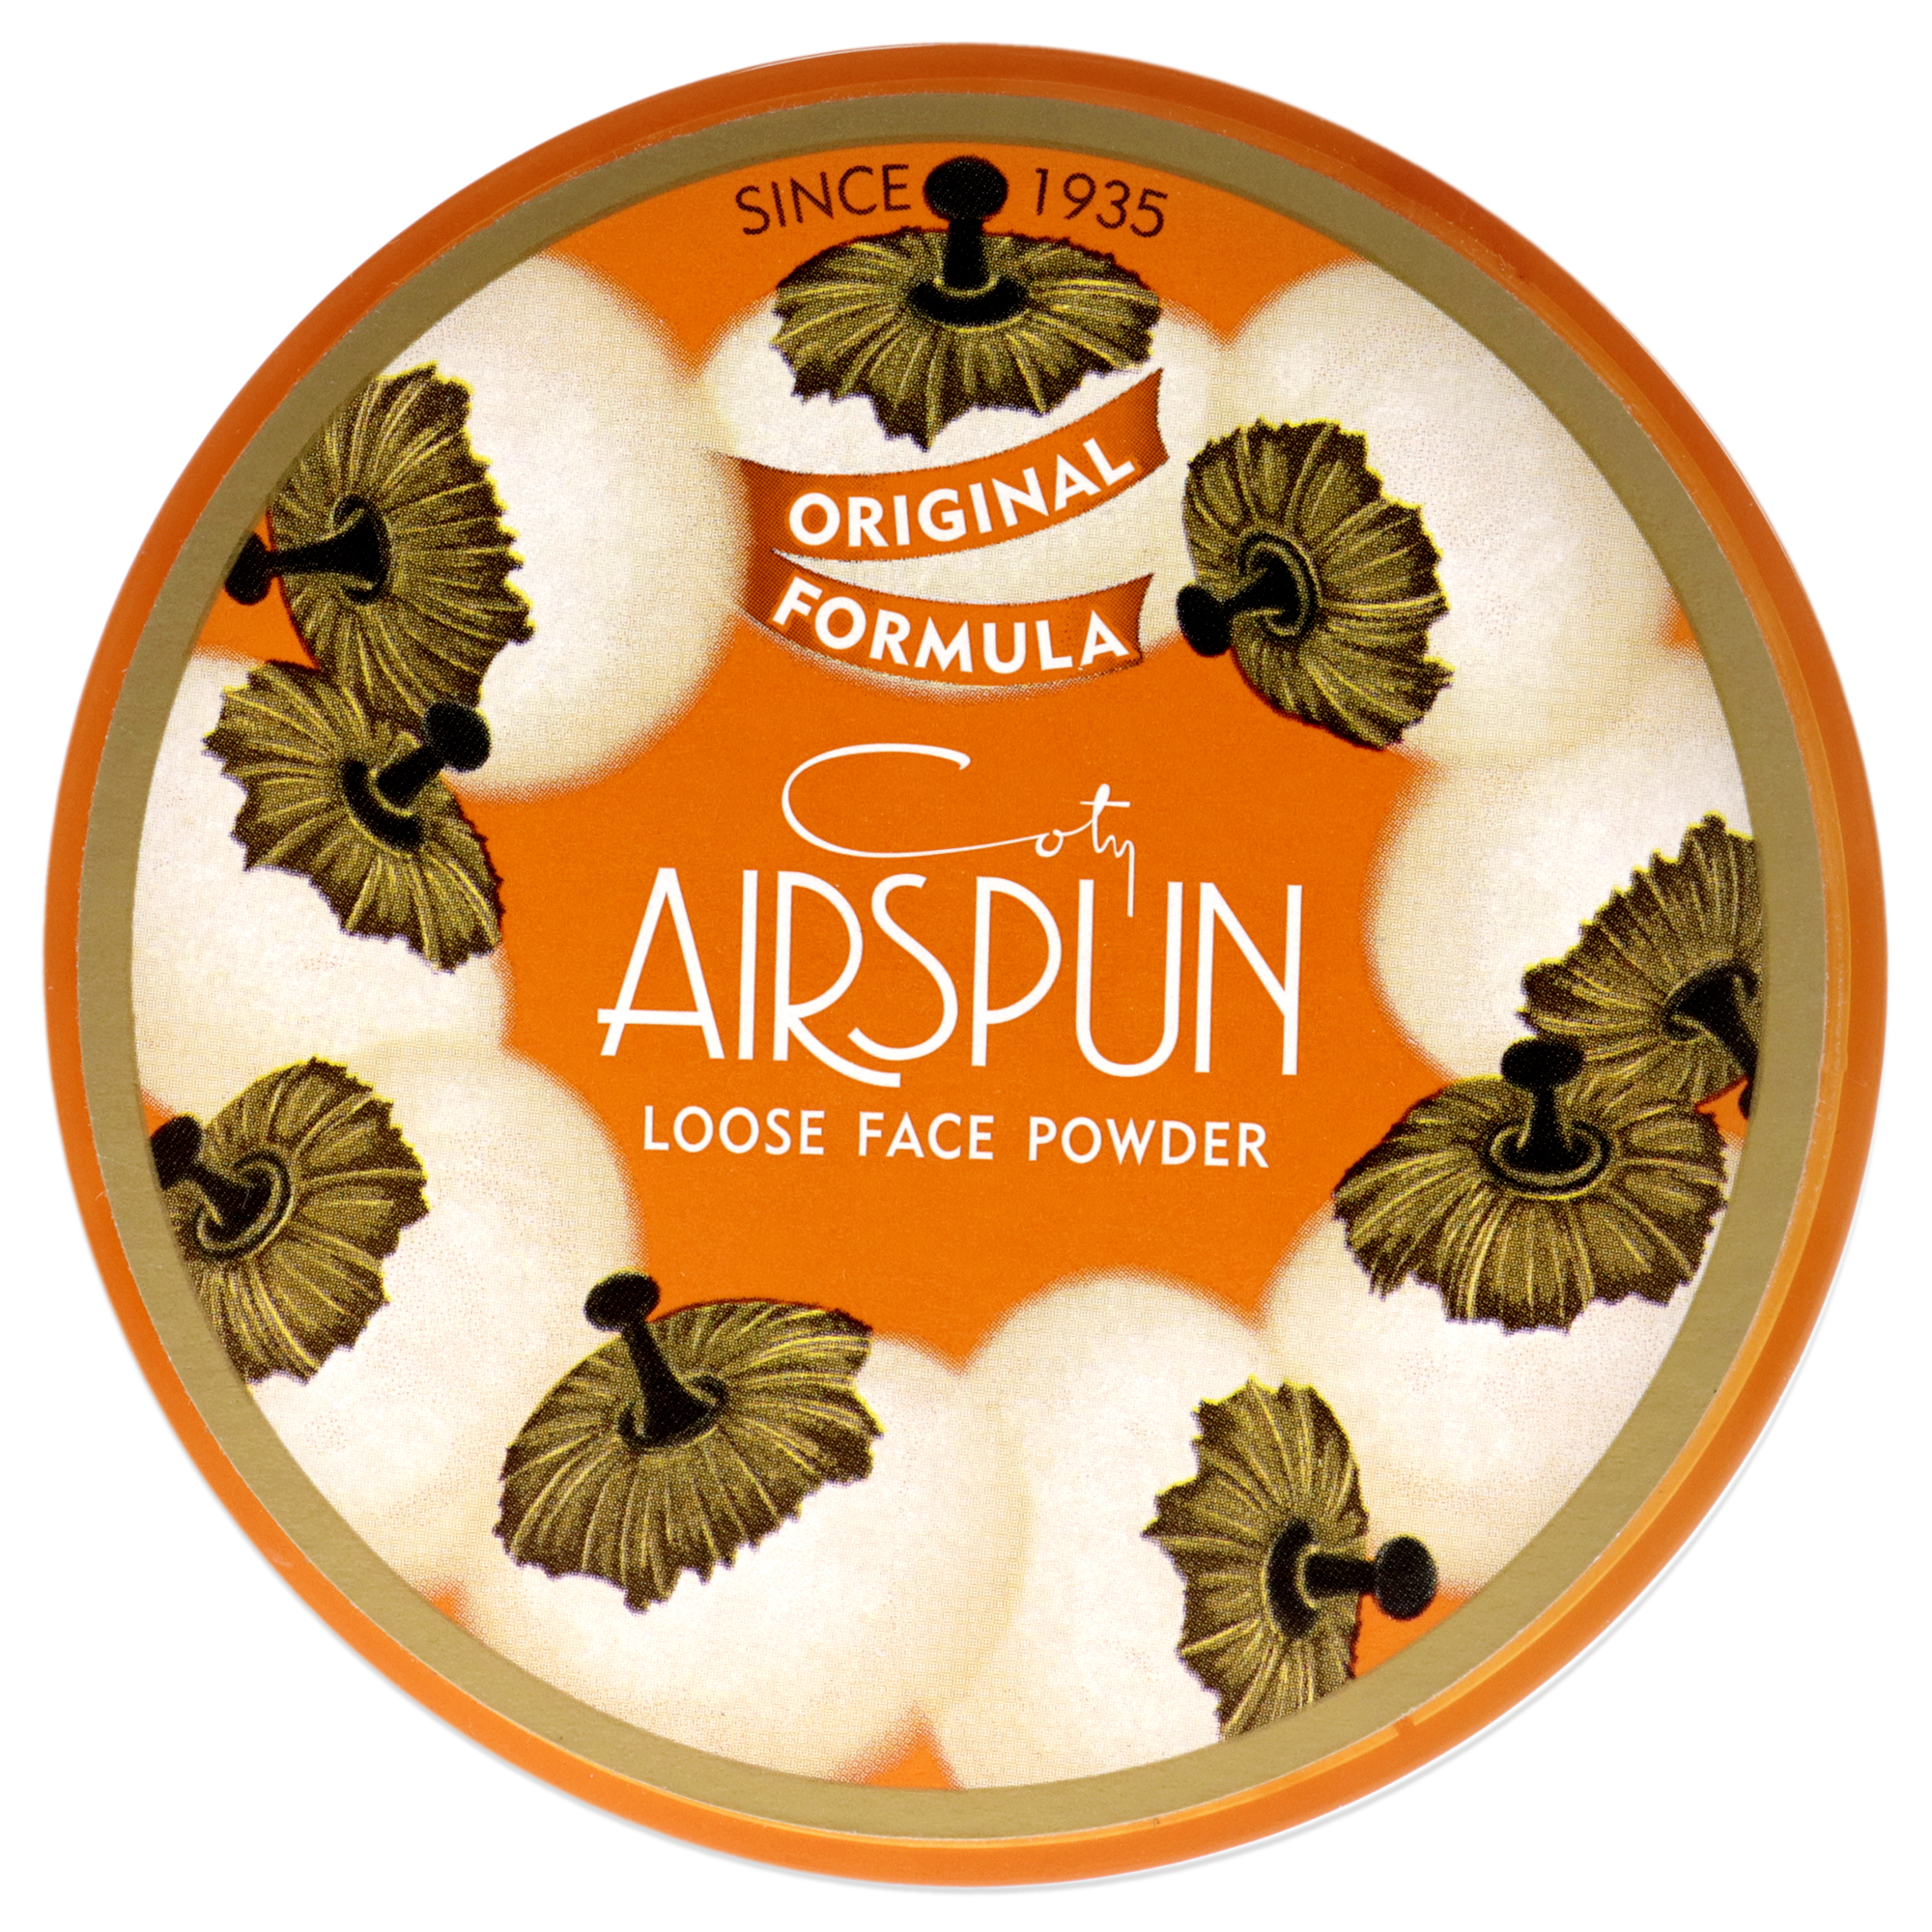 Coty Airspun Loose Face Powder, 041 Translucent Extra Coverage, 2.3 oz - image 1 of 3